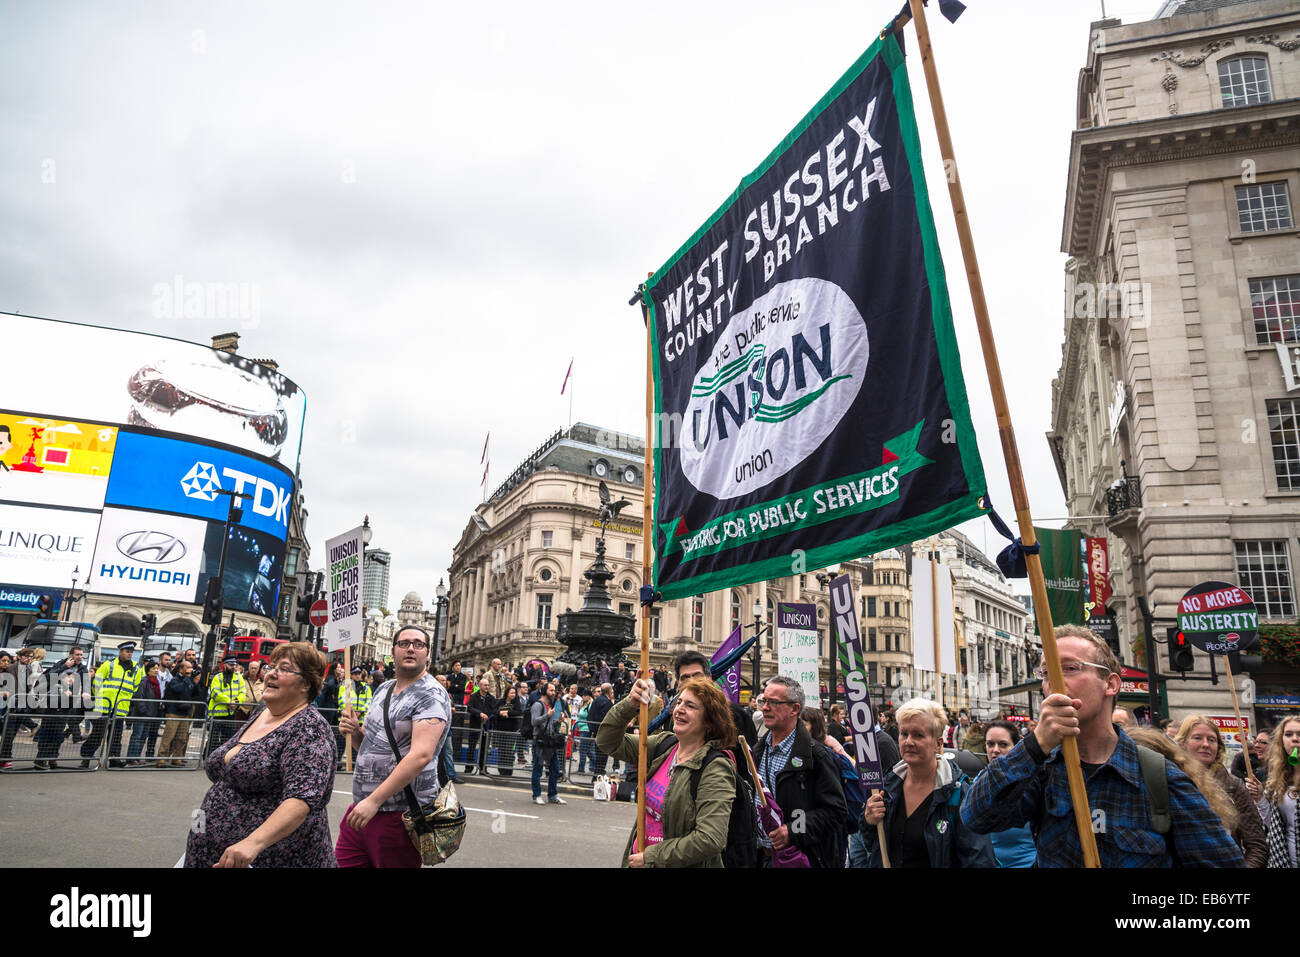 Britain Needs a Pay Rise march, Unison banner at Piccadilly Circus, London, 18 October 2014, UK Stock Photo